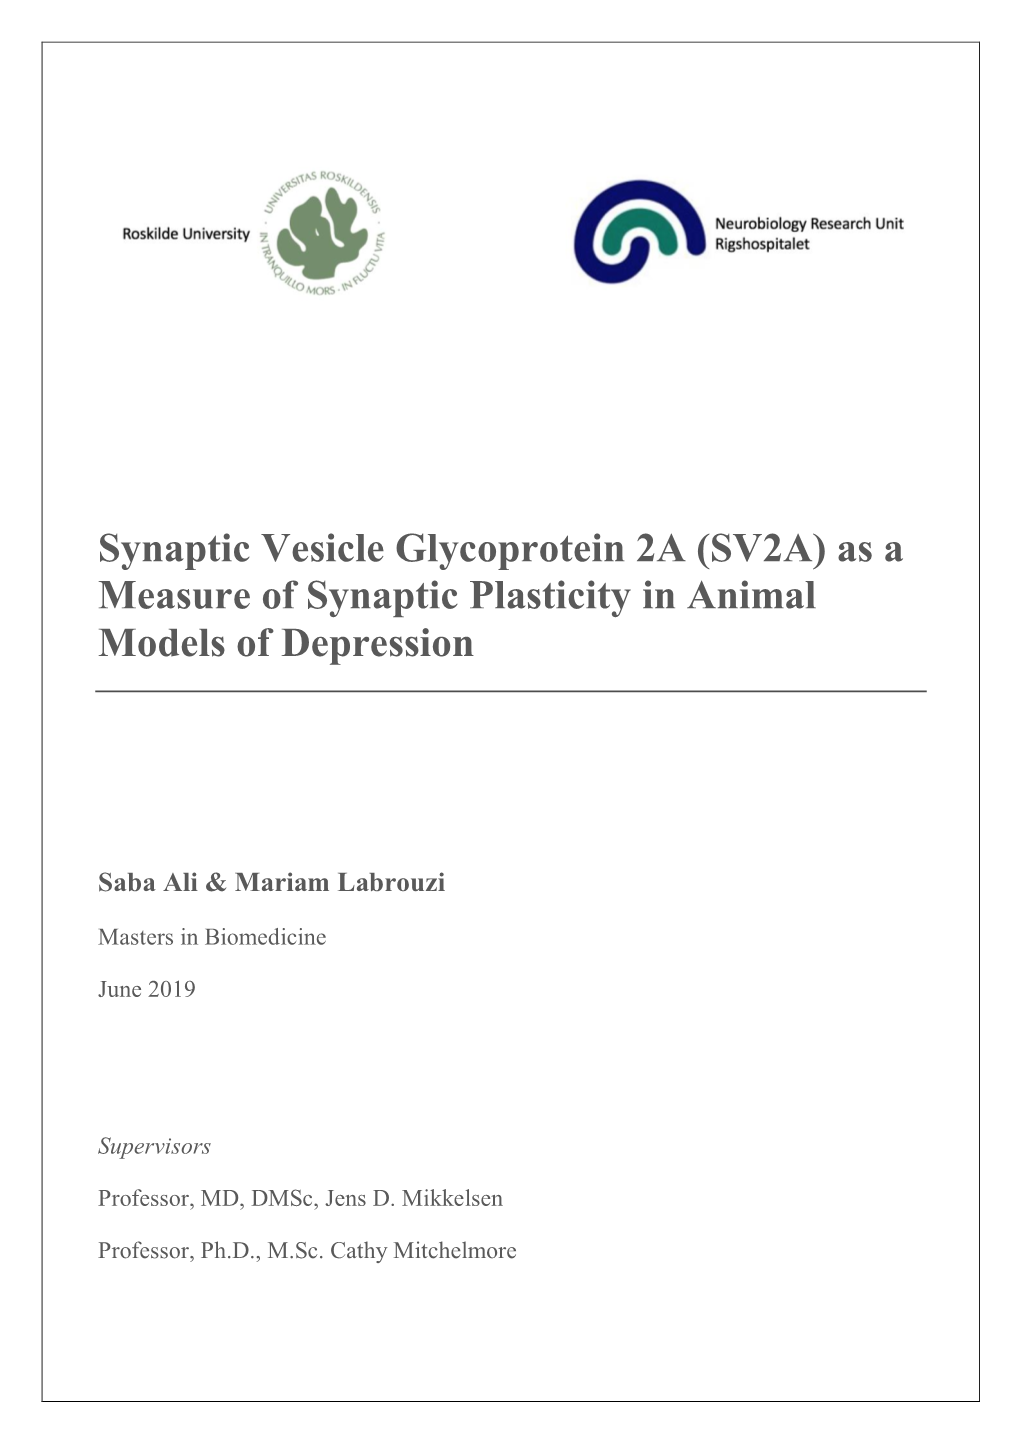 Synaptic Vesicle Glycoprotein 2A (SV2A) As a Measure of Synaptic Plasticity in Animal Models of Depression